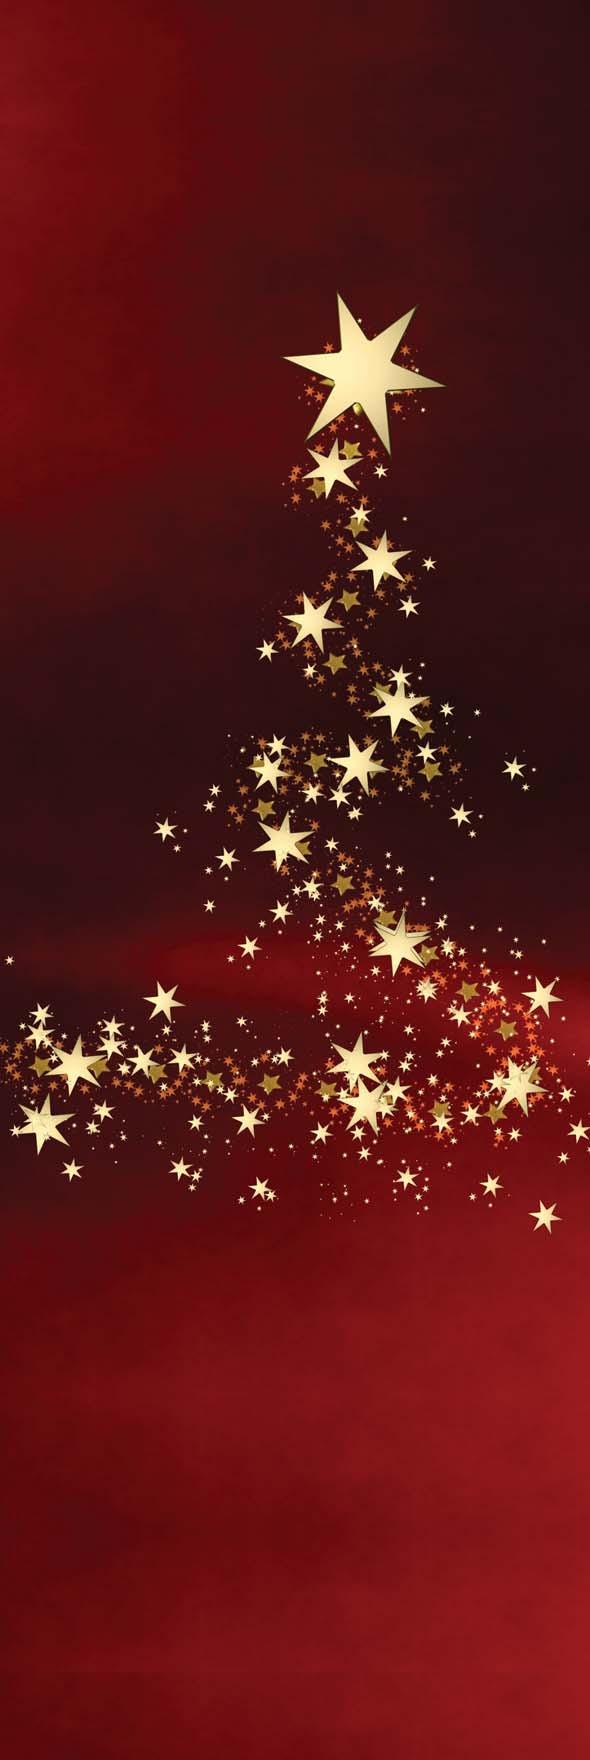 festive menu Available at the Stage Door & Hollybush Inn from 01 December until 31 December 2015 Most dishes are available gluten free - ask staff for details *Items ordered outside these times will